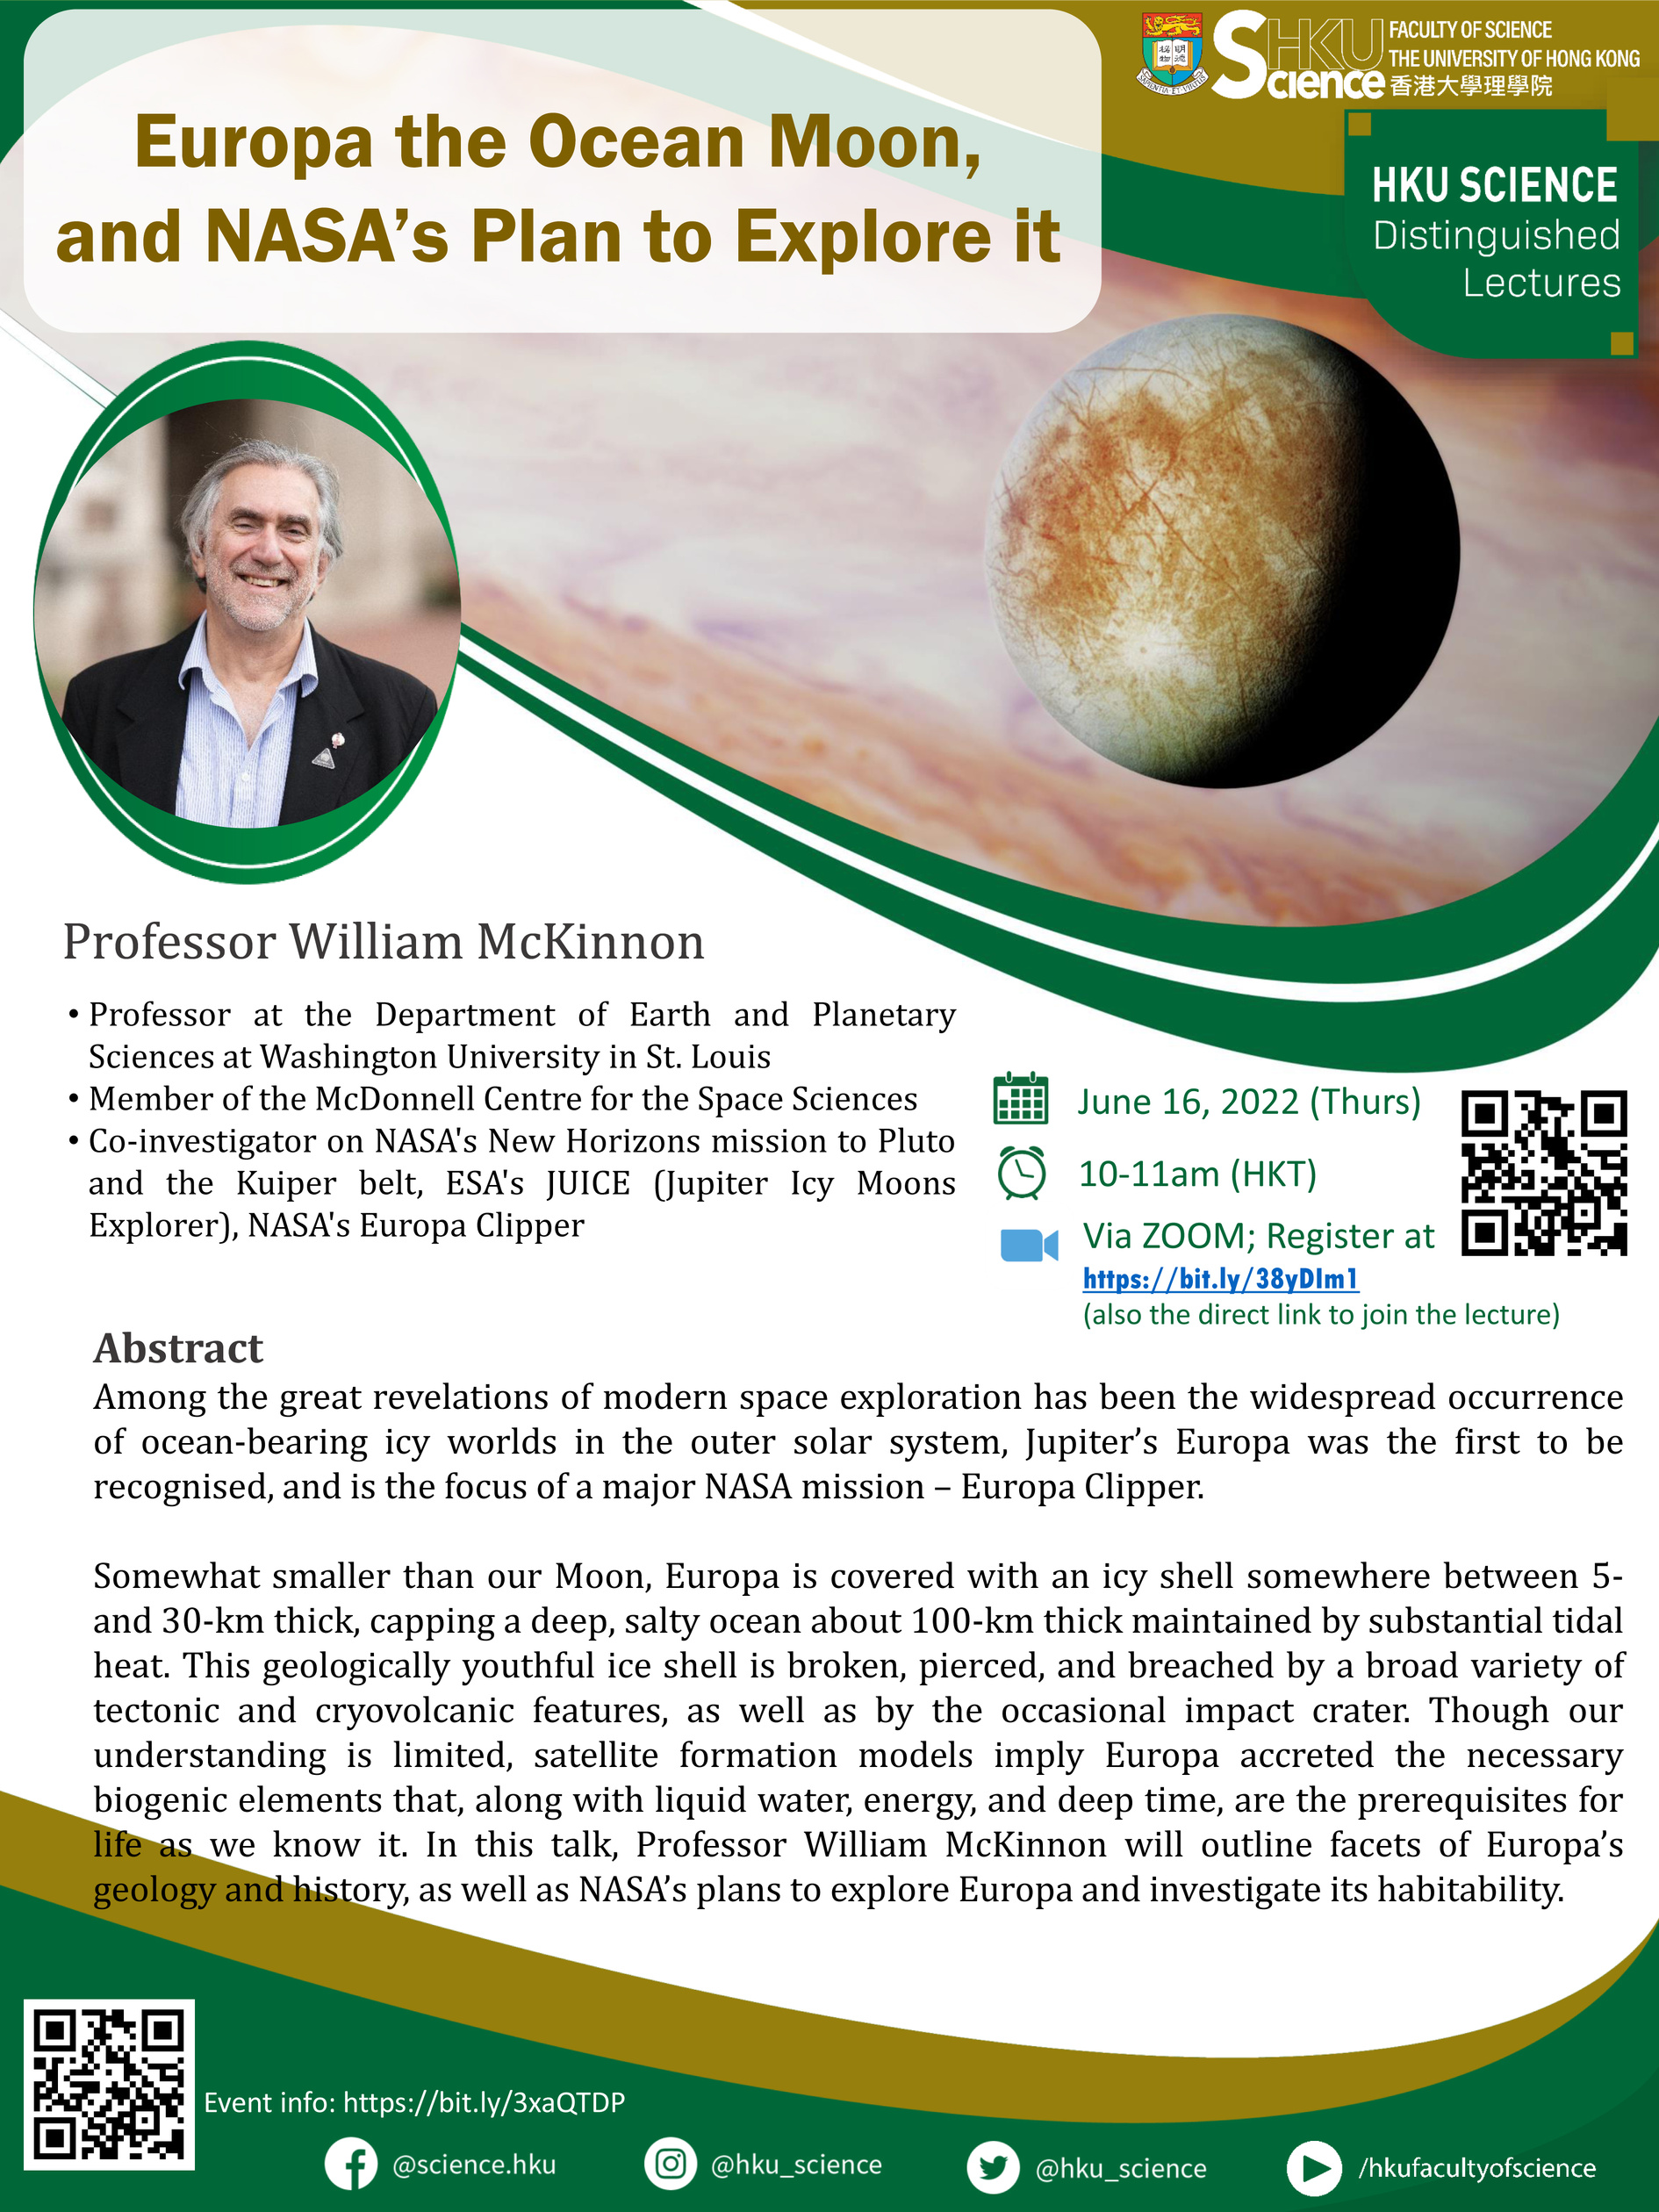 Science Distinguished Lecture: Europa the Ocean Moon & NASA's Plan to Explore it 